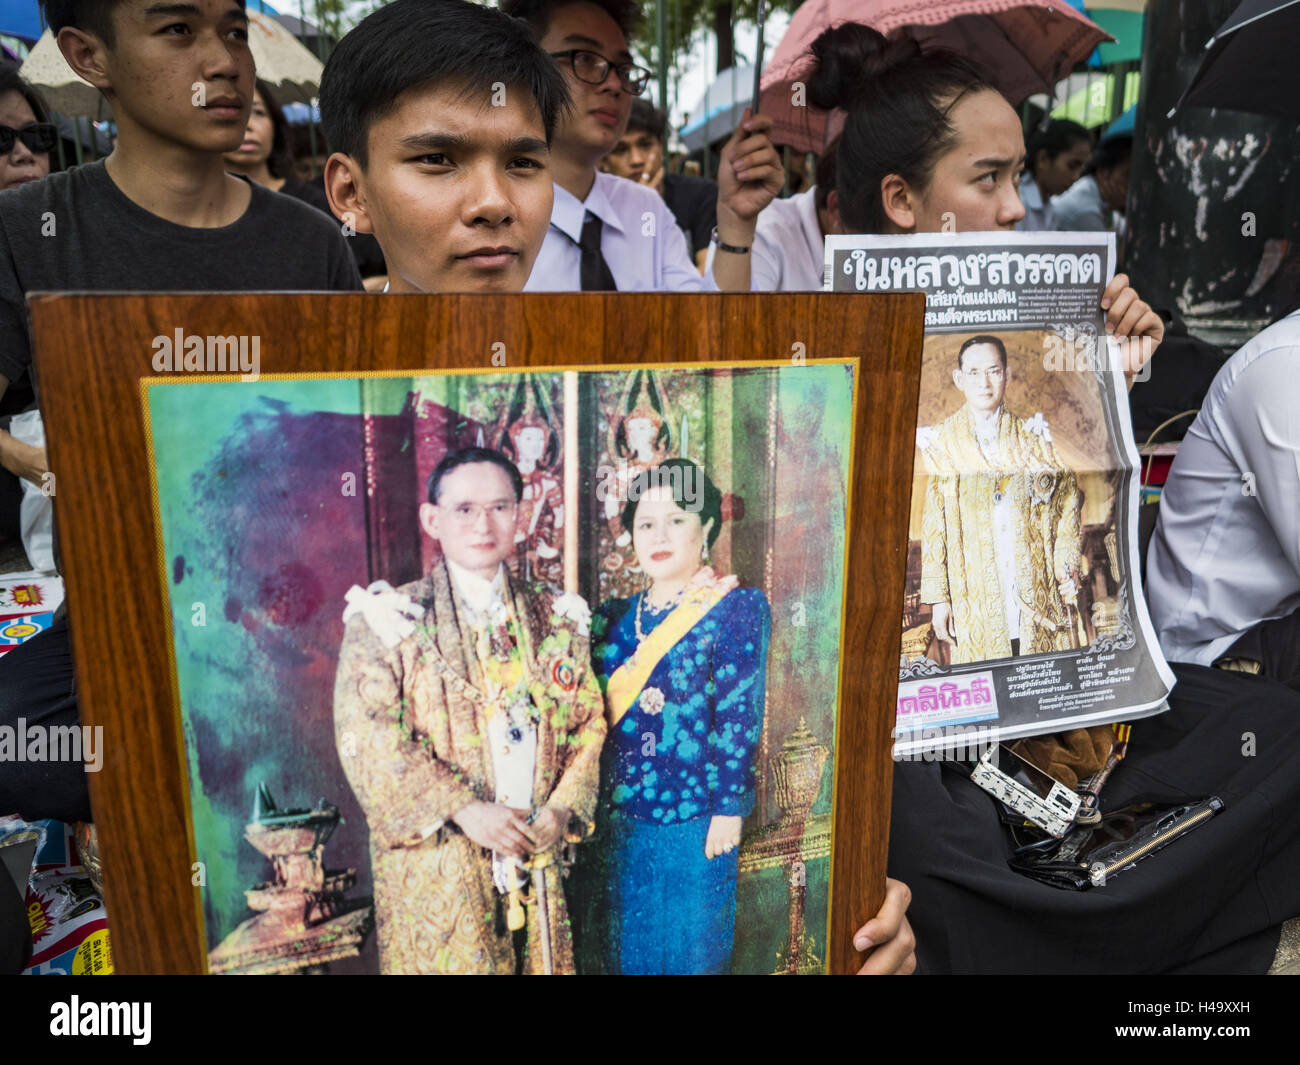 Bangkok, Bangkok, Thailand. 14th Oct, 2016. People wait on Rajadamnoen Avenue in Bangkok for the King's body to be brought to the Grand Palace. King Bhumibol Adulyadej died Oct. 13, 2016. He was 88. His death comes after a period of failing health. With the king's death, the world's longest-reigning monarch is Queen Elizabeth II, who ascended to the British throne in 1952. Bhumibol Adulyadej, was born in Cambridge, MA, on 5 December 1927. He was the ninth monarch of Thailand from the Chakri Dynasty and is known as Rama IX. Credit:  ZUMA Press, Inc./Alamy Live News Stock Photo